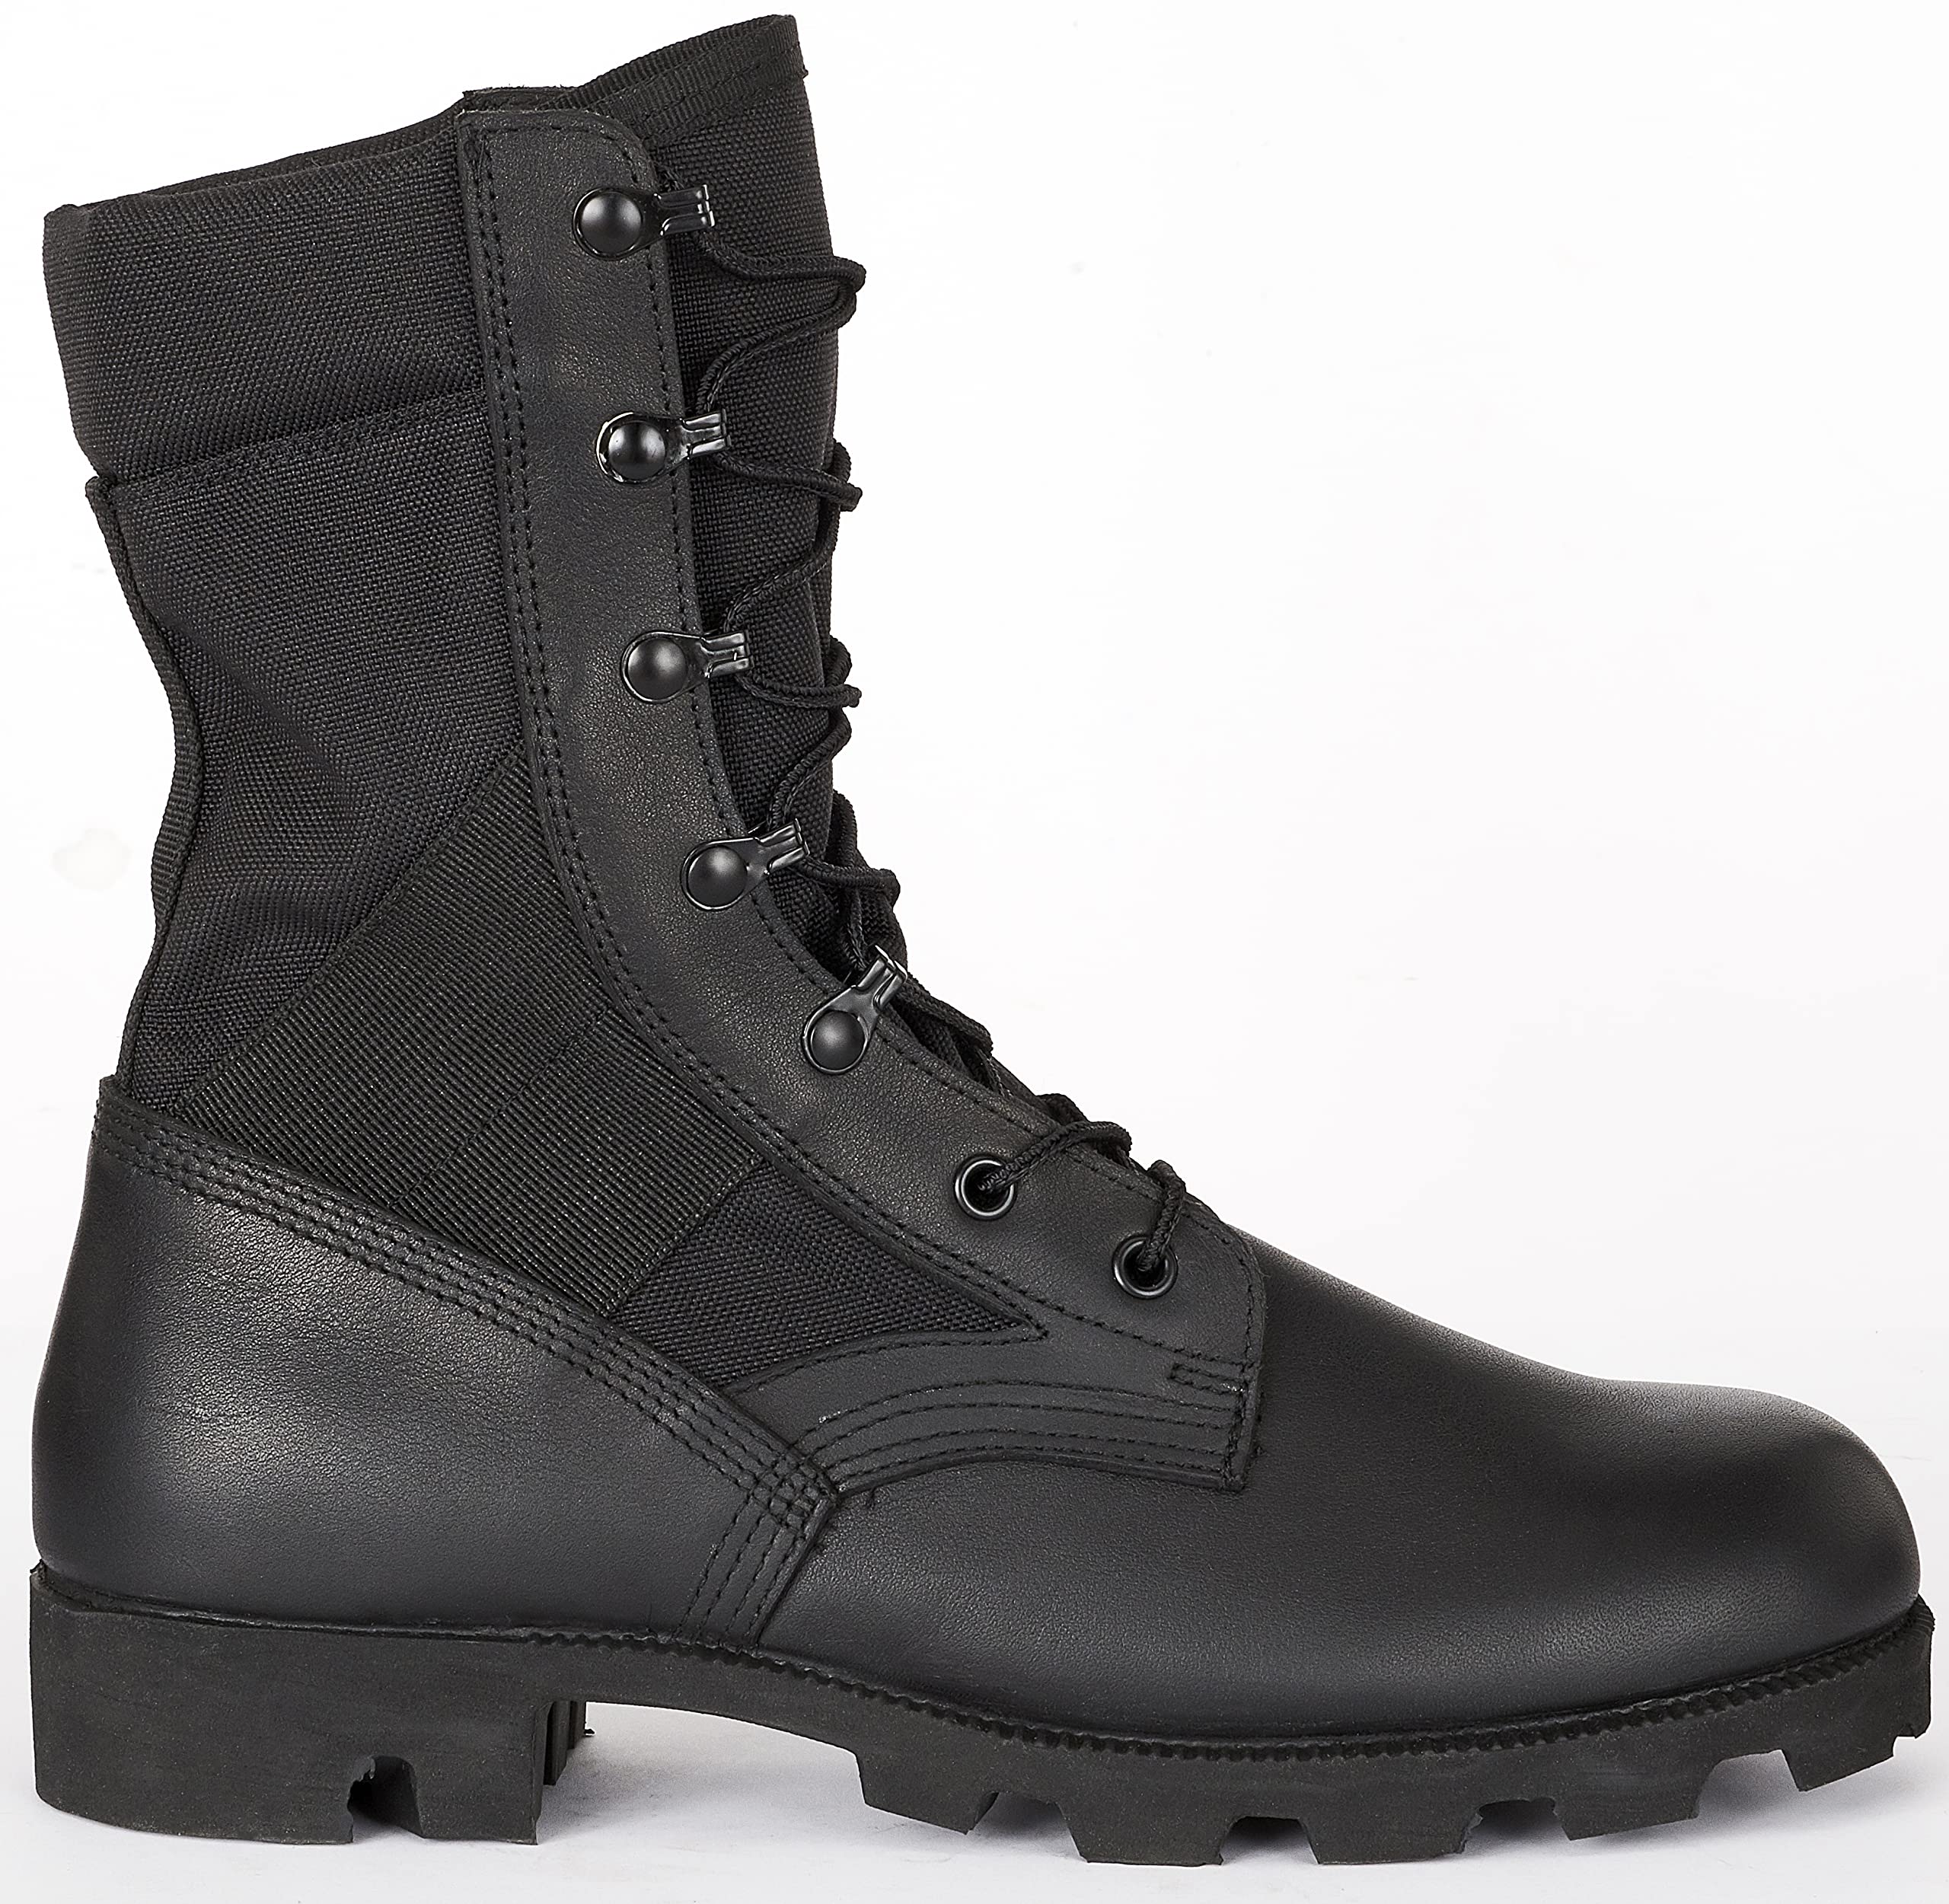 Belleville 8 Inch Canopy Jungle Boots - Highly Breathable Leather & Nylon Upper, Double & Triple Stitched Seams, Medial Side Drainage Vents, and Classic Panama Outsole Tread